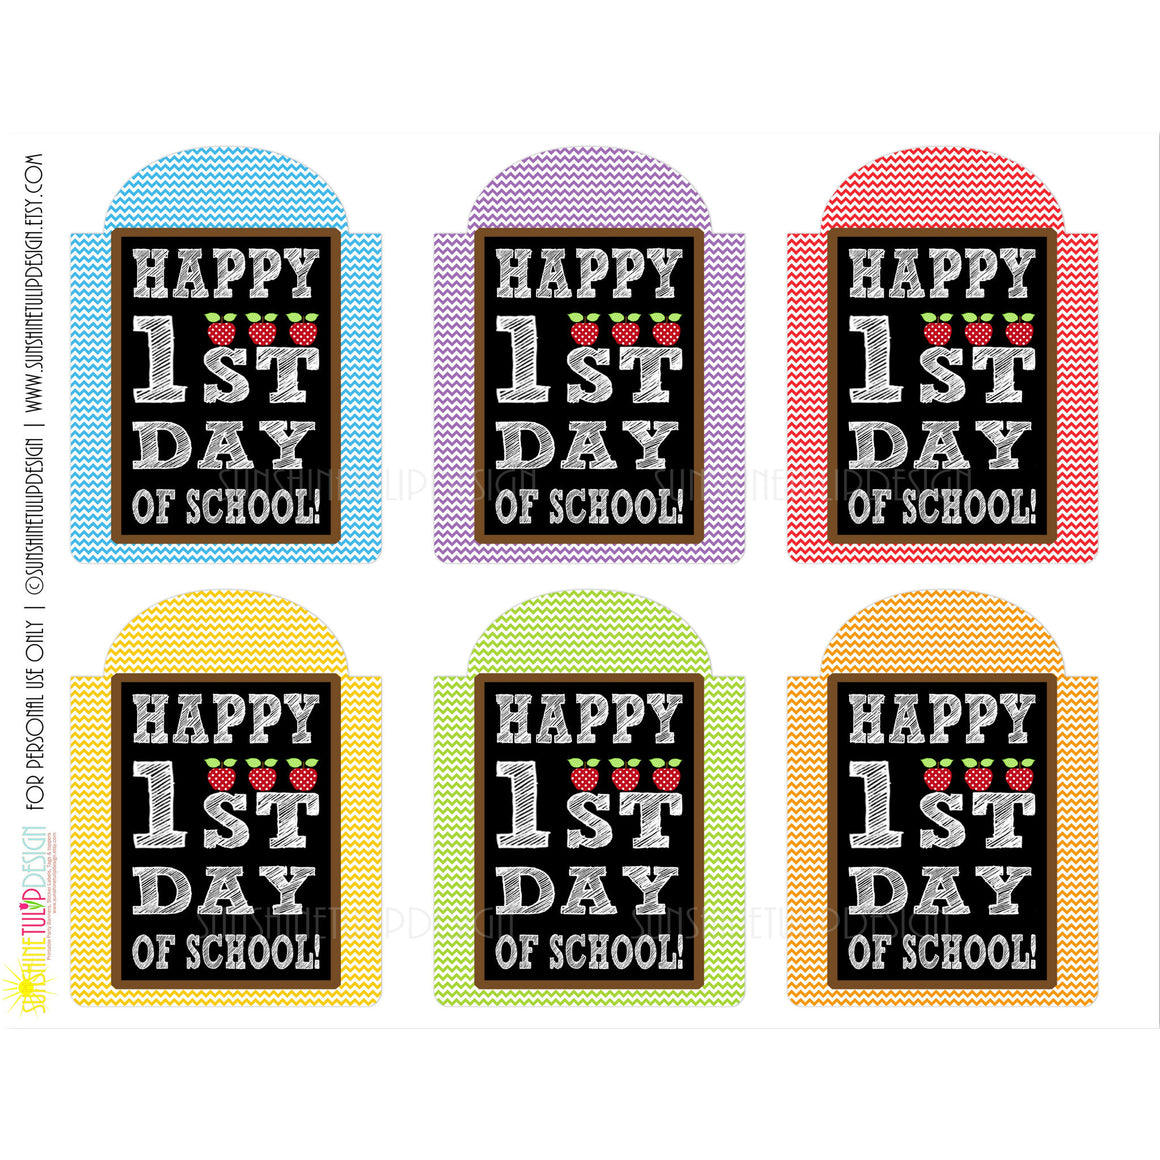 Printable Welcome Back To School Gift Tags, Happy 1st Day Back to School Printable Teacher Appreciation Tags by SUNSHINETULIPDESIGN - Sunshinetulipdesign